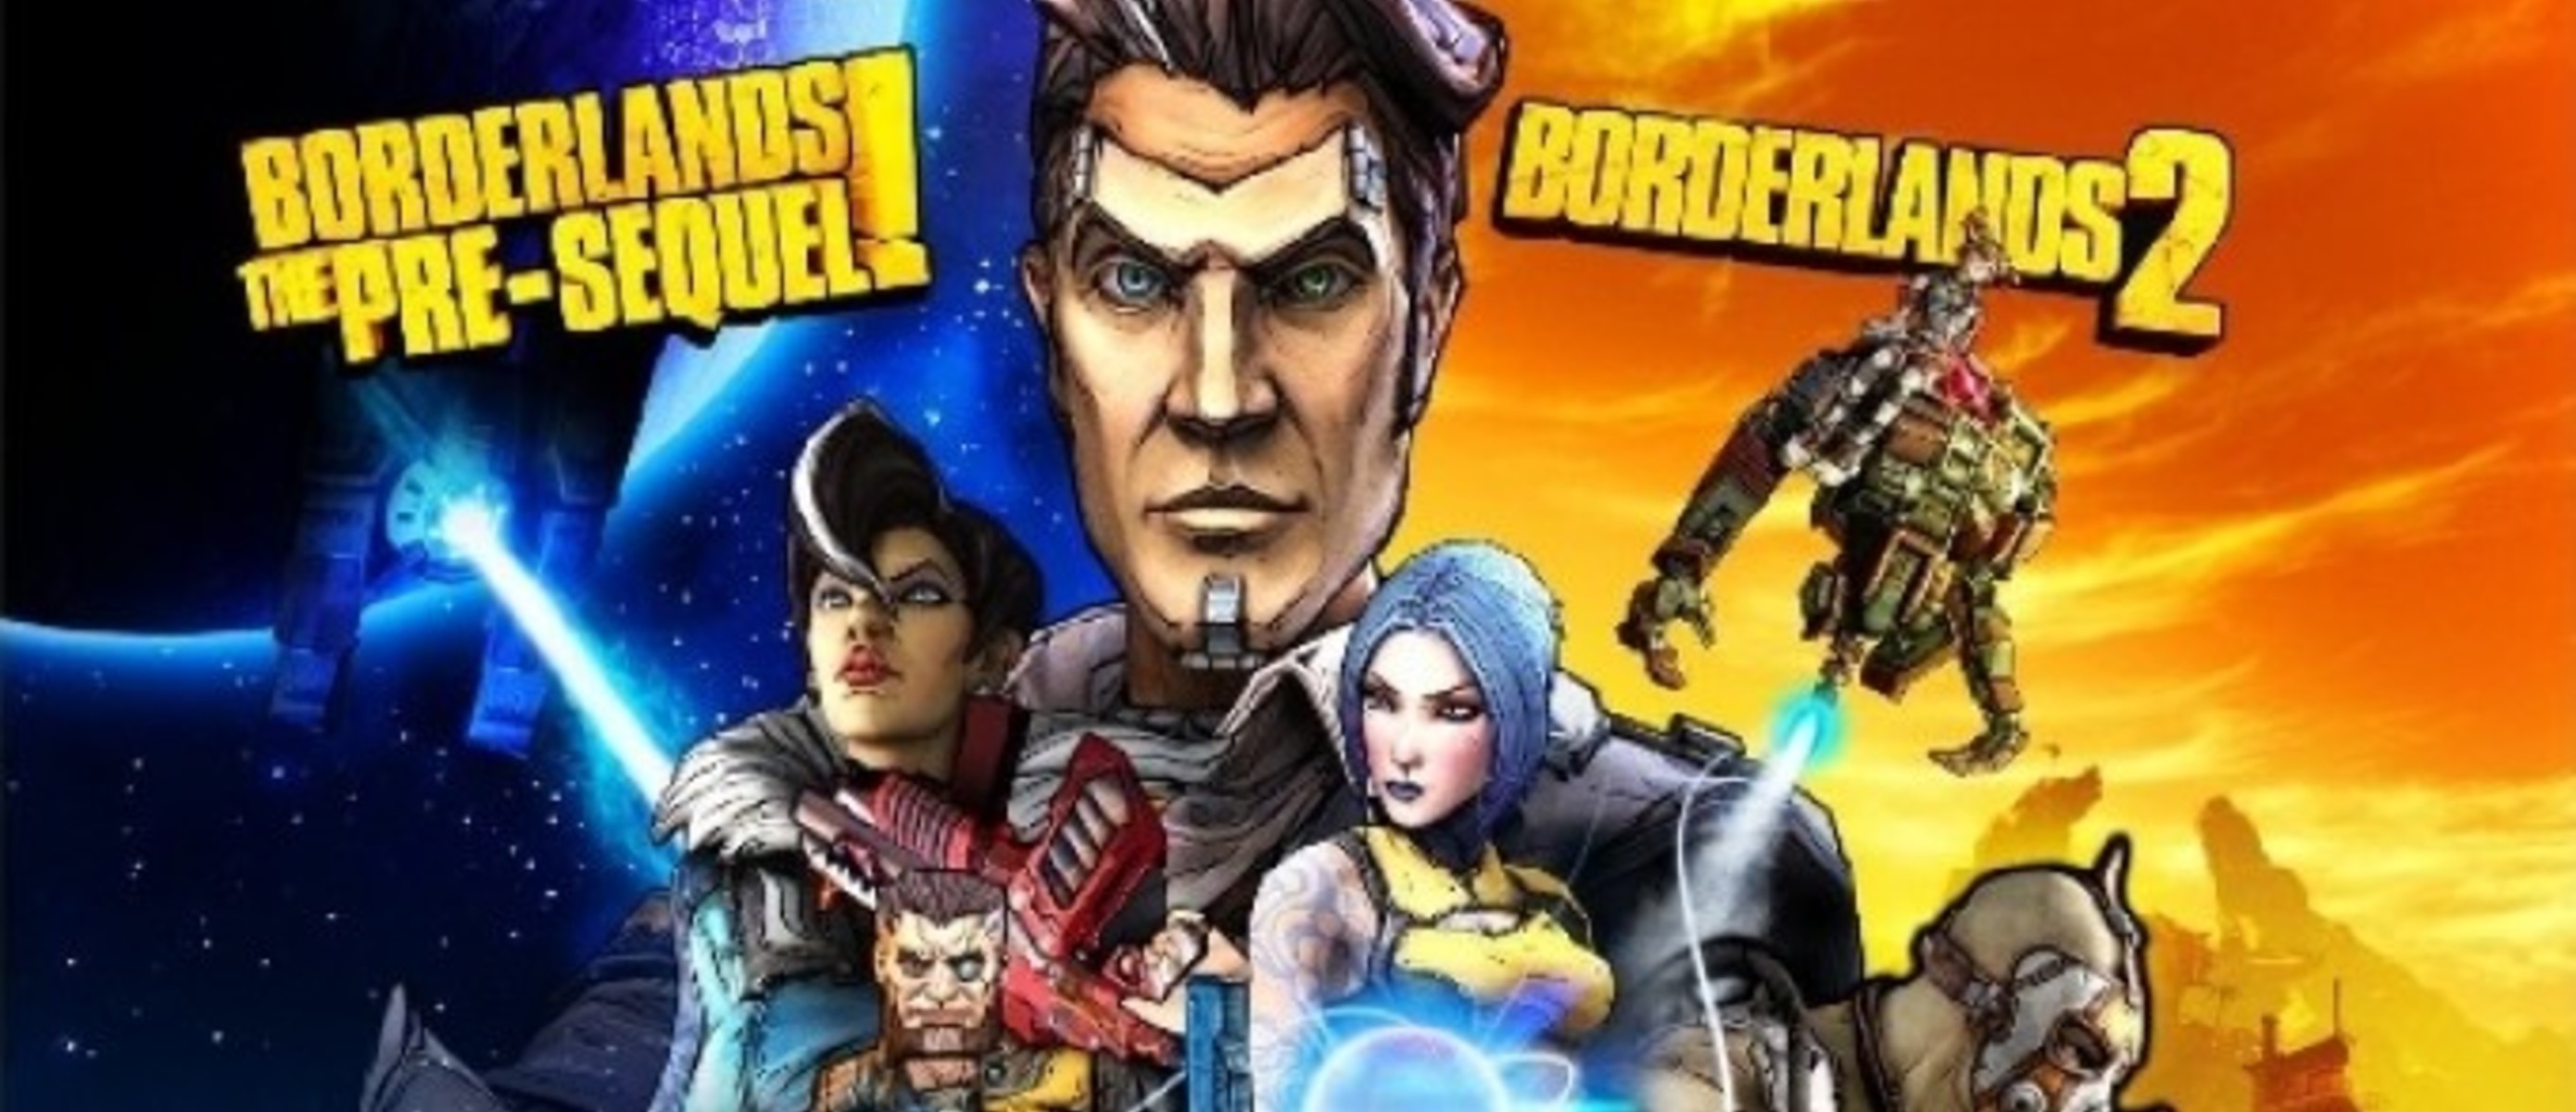 The handsome collection. Бордерлендс the handsome collection. Borderlands the handsome collection ps4. Borderlands: the handsome collection обложка. Borderlands the pre sequel Epic.